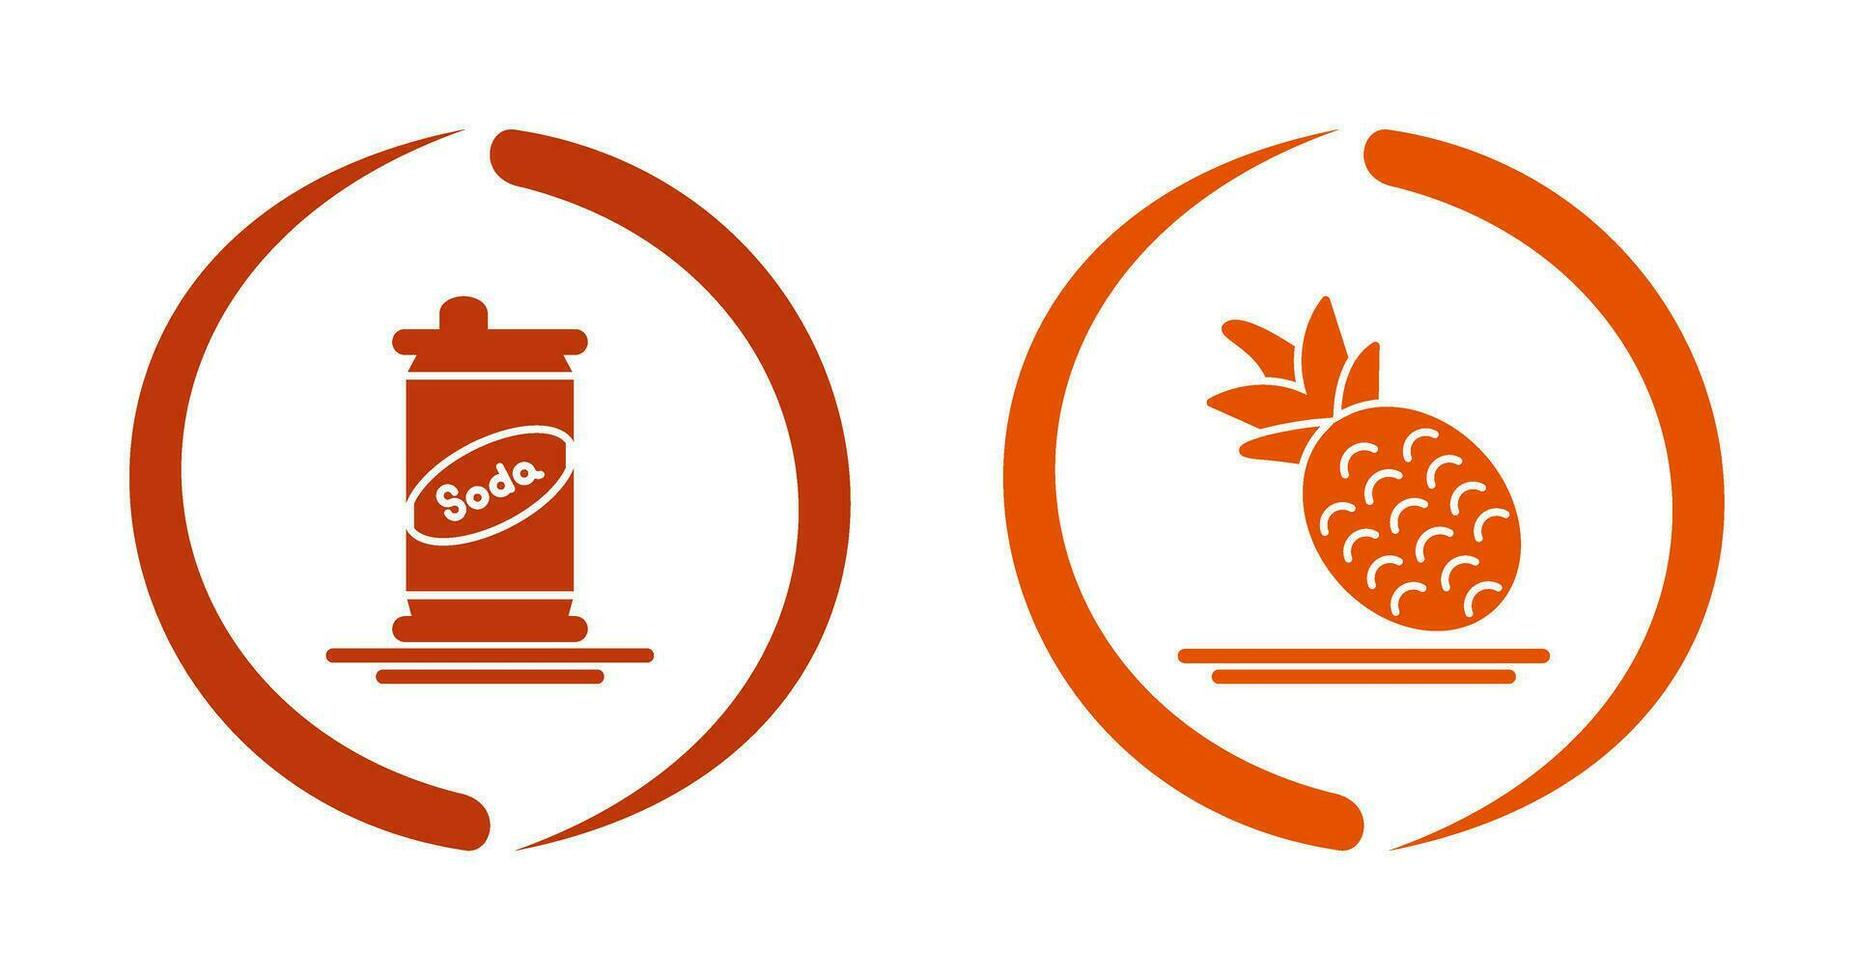 Soda Can and Pineapple Icon vector